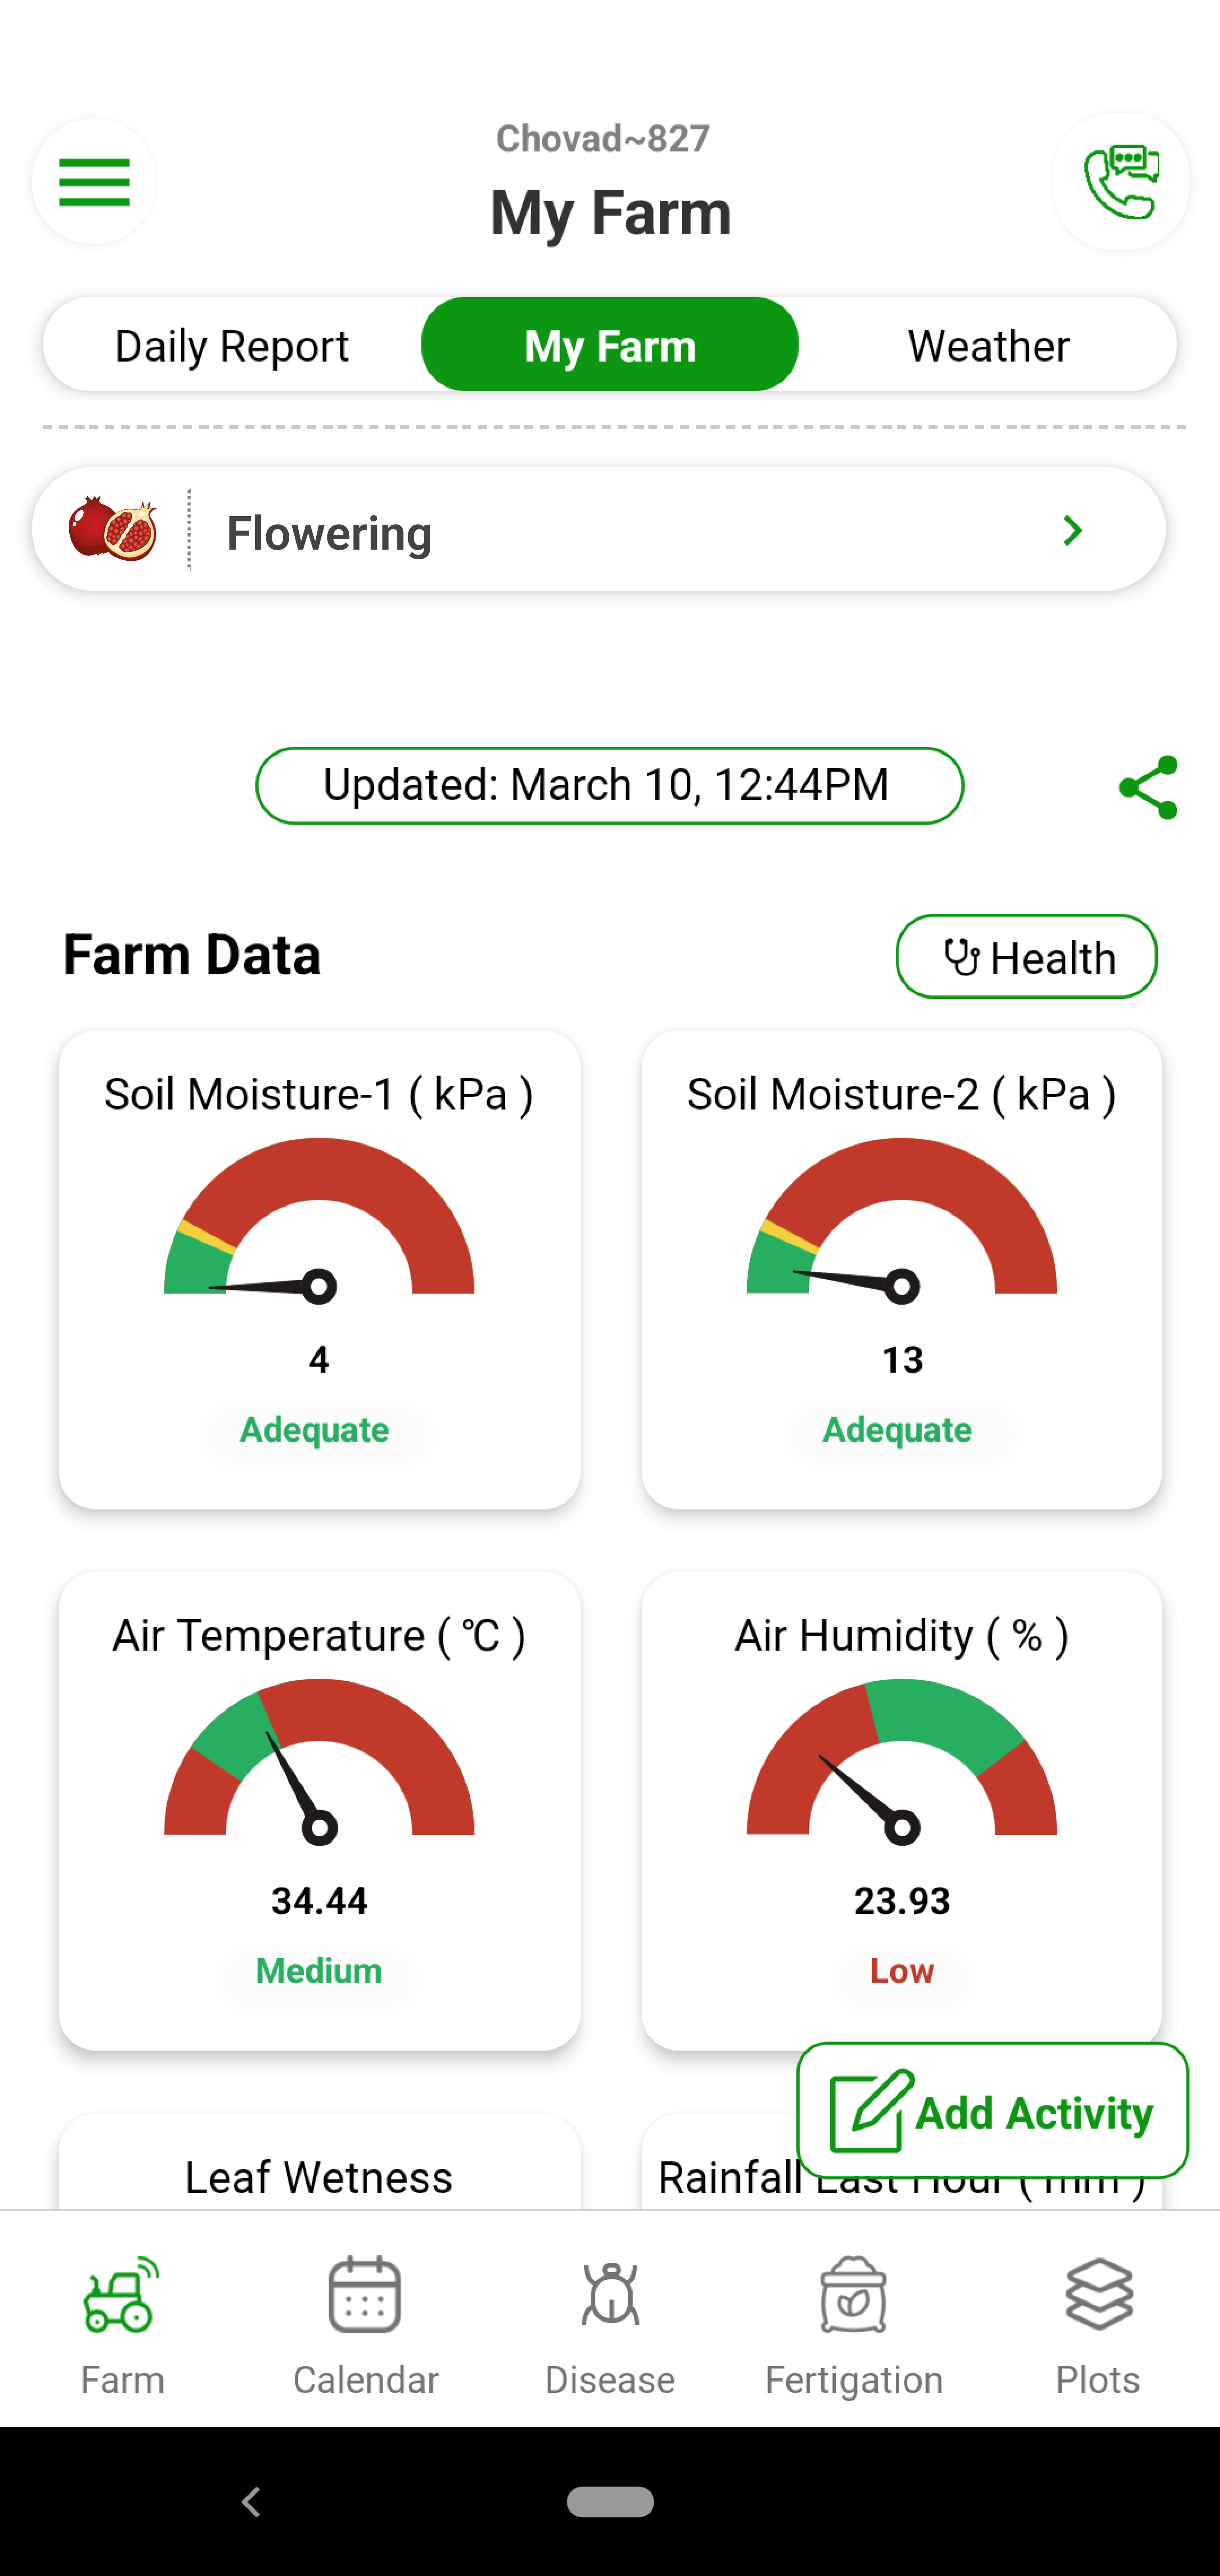 Fyllo device installed at your orchard monitors your farm 24*7 and captures 12 critical parameters in real time. You get this data on you mobile and dashboard in real time.